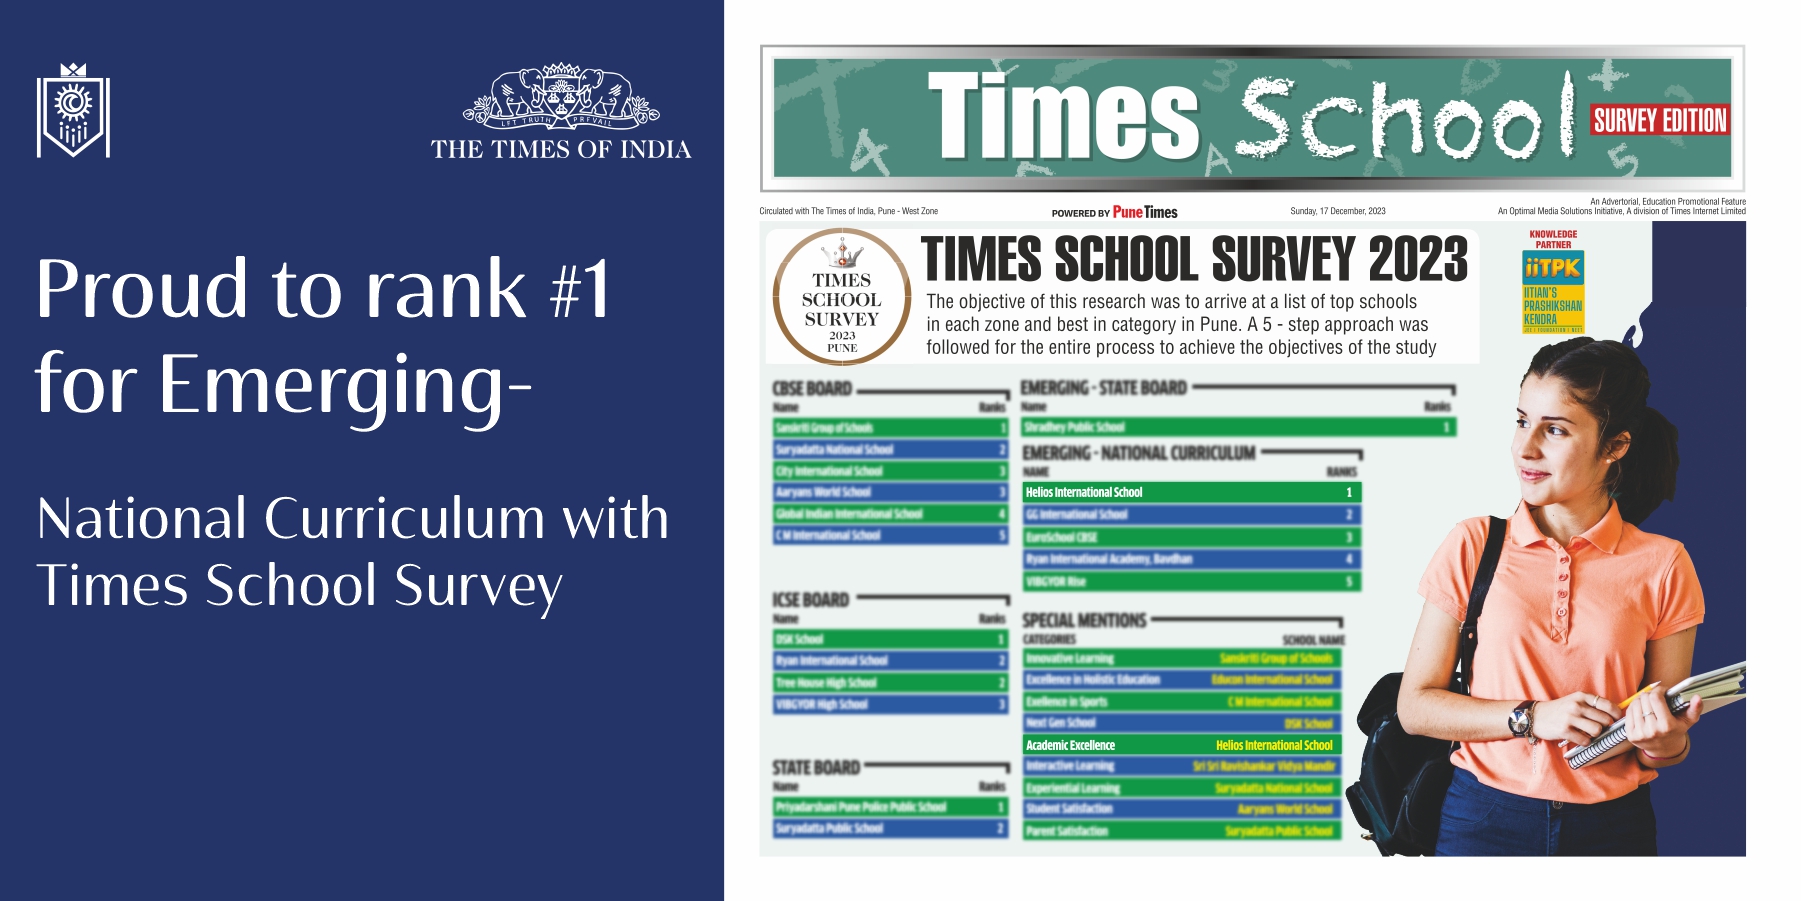 Proud to rank #1 for Emerging- National Curriculum with Times School Survey